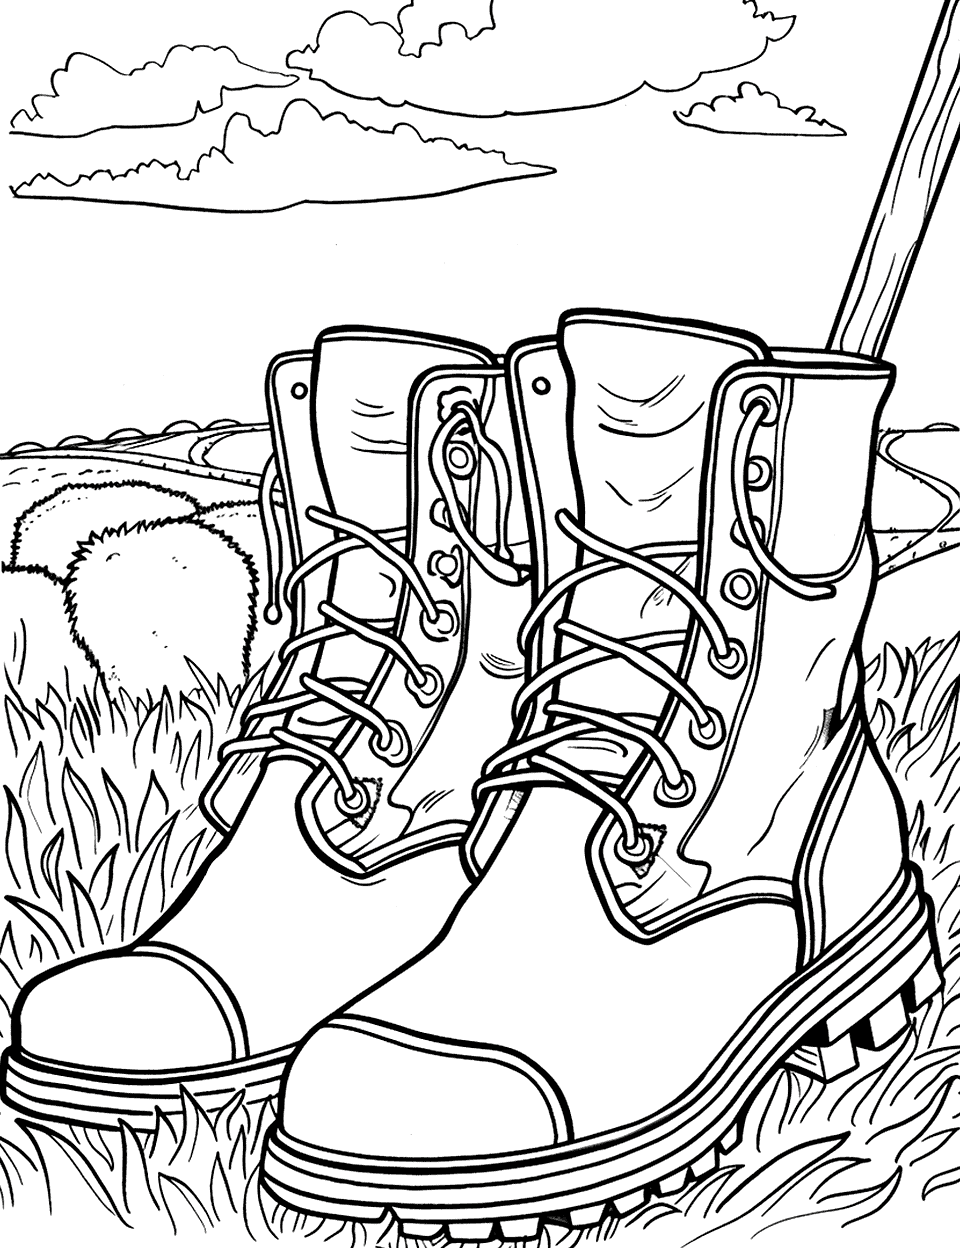 Shepherd's Boots in the Meadow Shoe Coloring Page - Sturdy shepards boots in an open field.